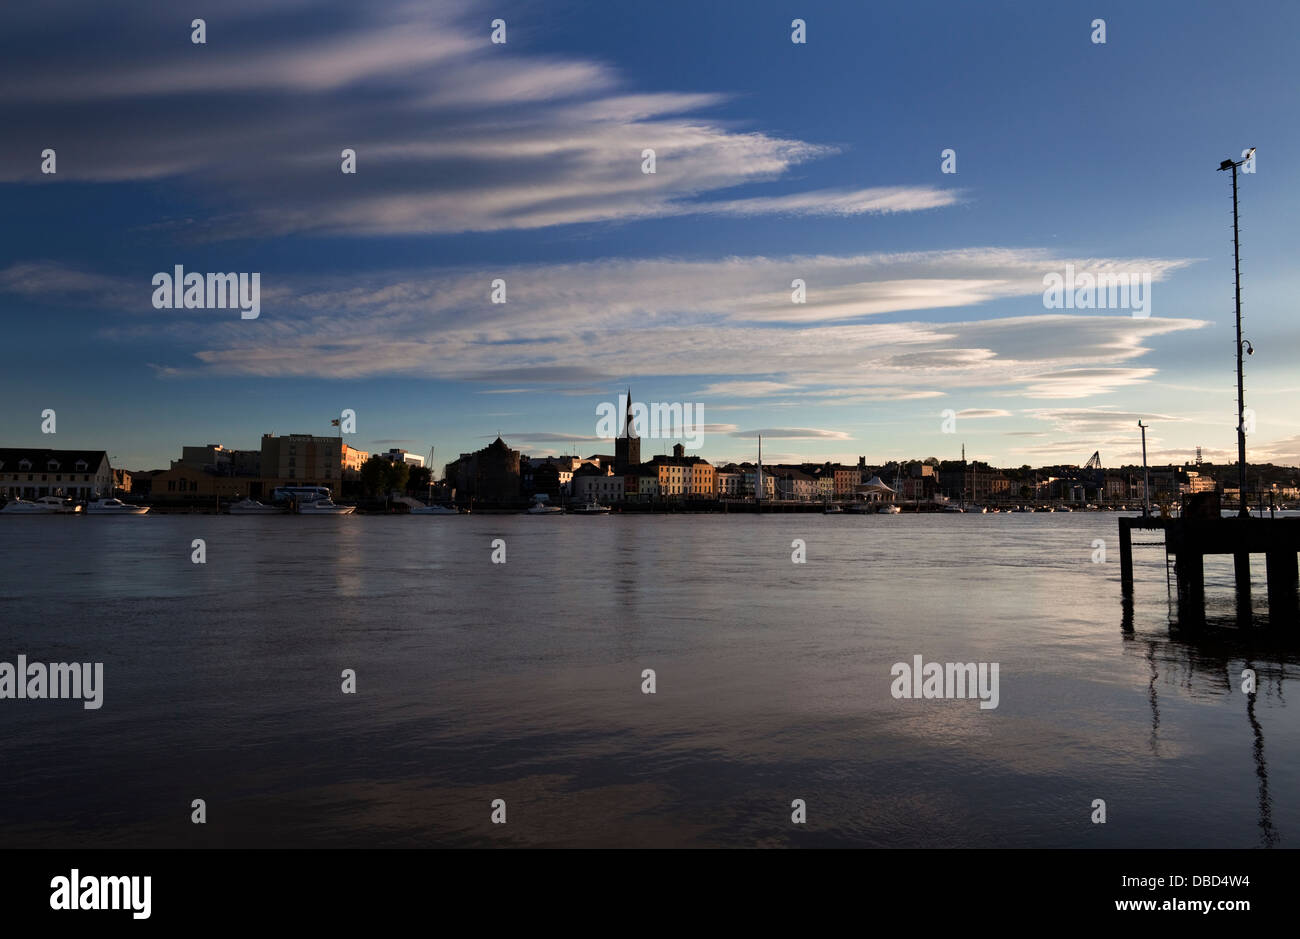 Waterford City as seen from Ferrybank on the opposite bank of the River Suir, County Waterford, Ireland Stock Photo